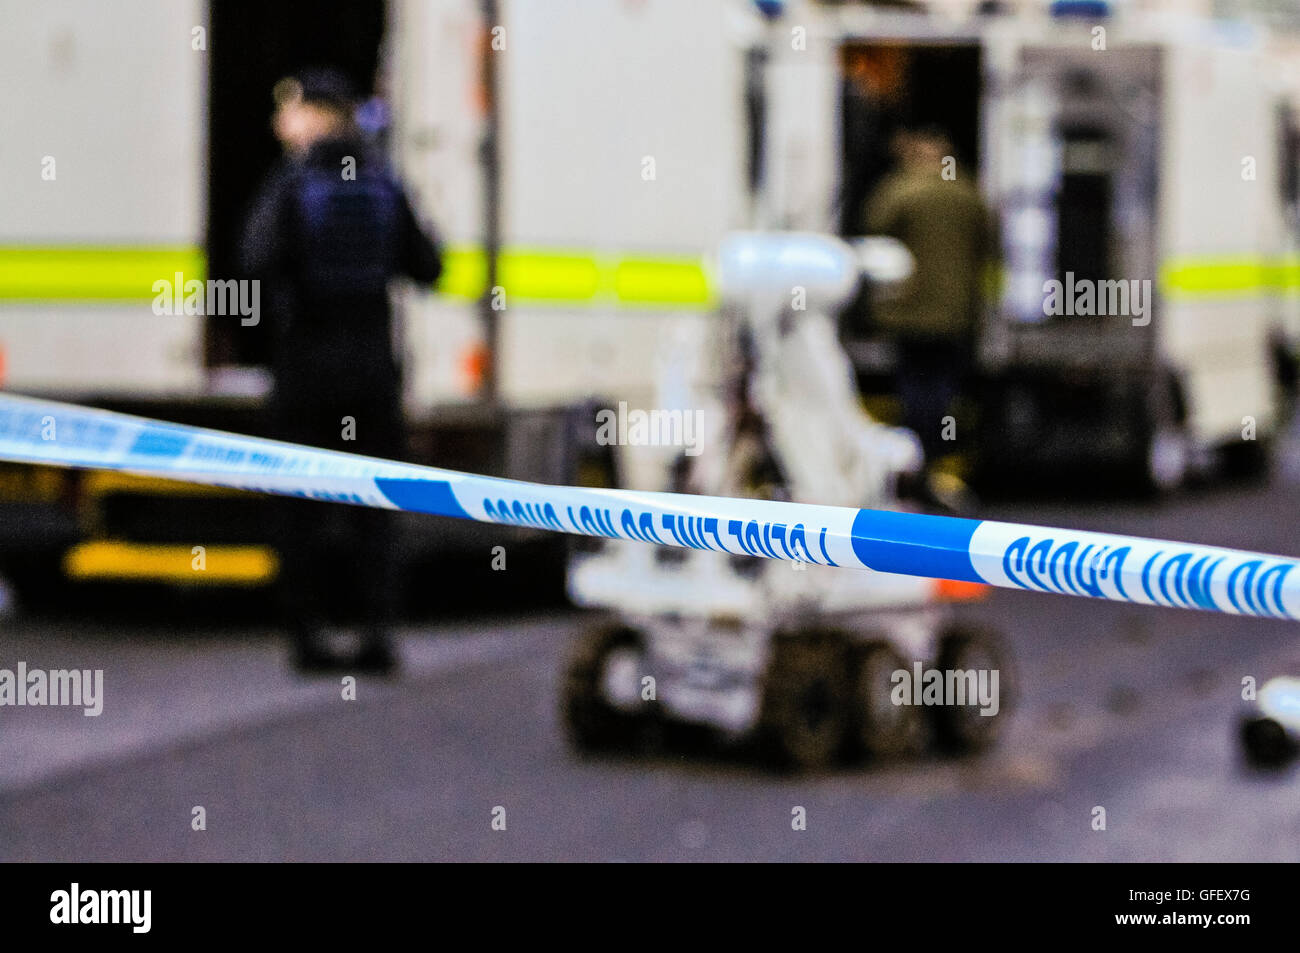 Carrickfergus, Northern Ireland. 19 Jan 2014 - Police tape seals of the area at a security alert where a suspect device has been found. Stock Photo